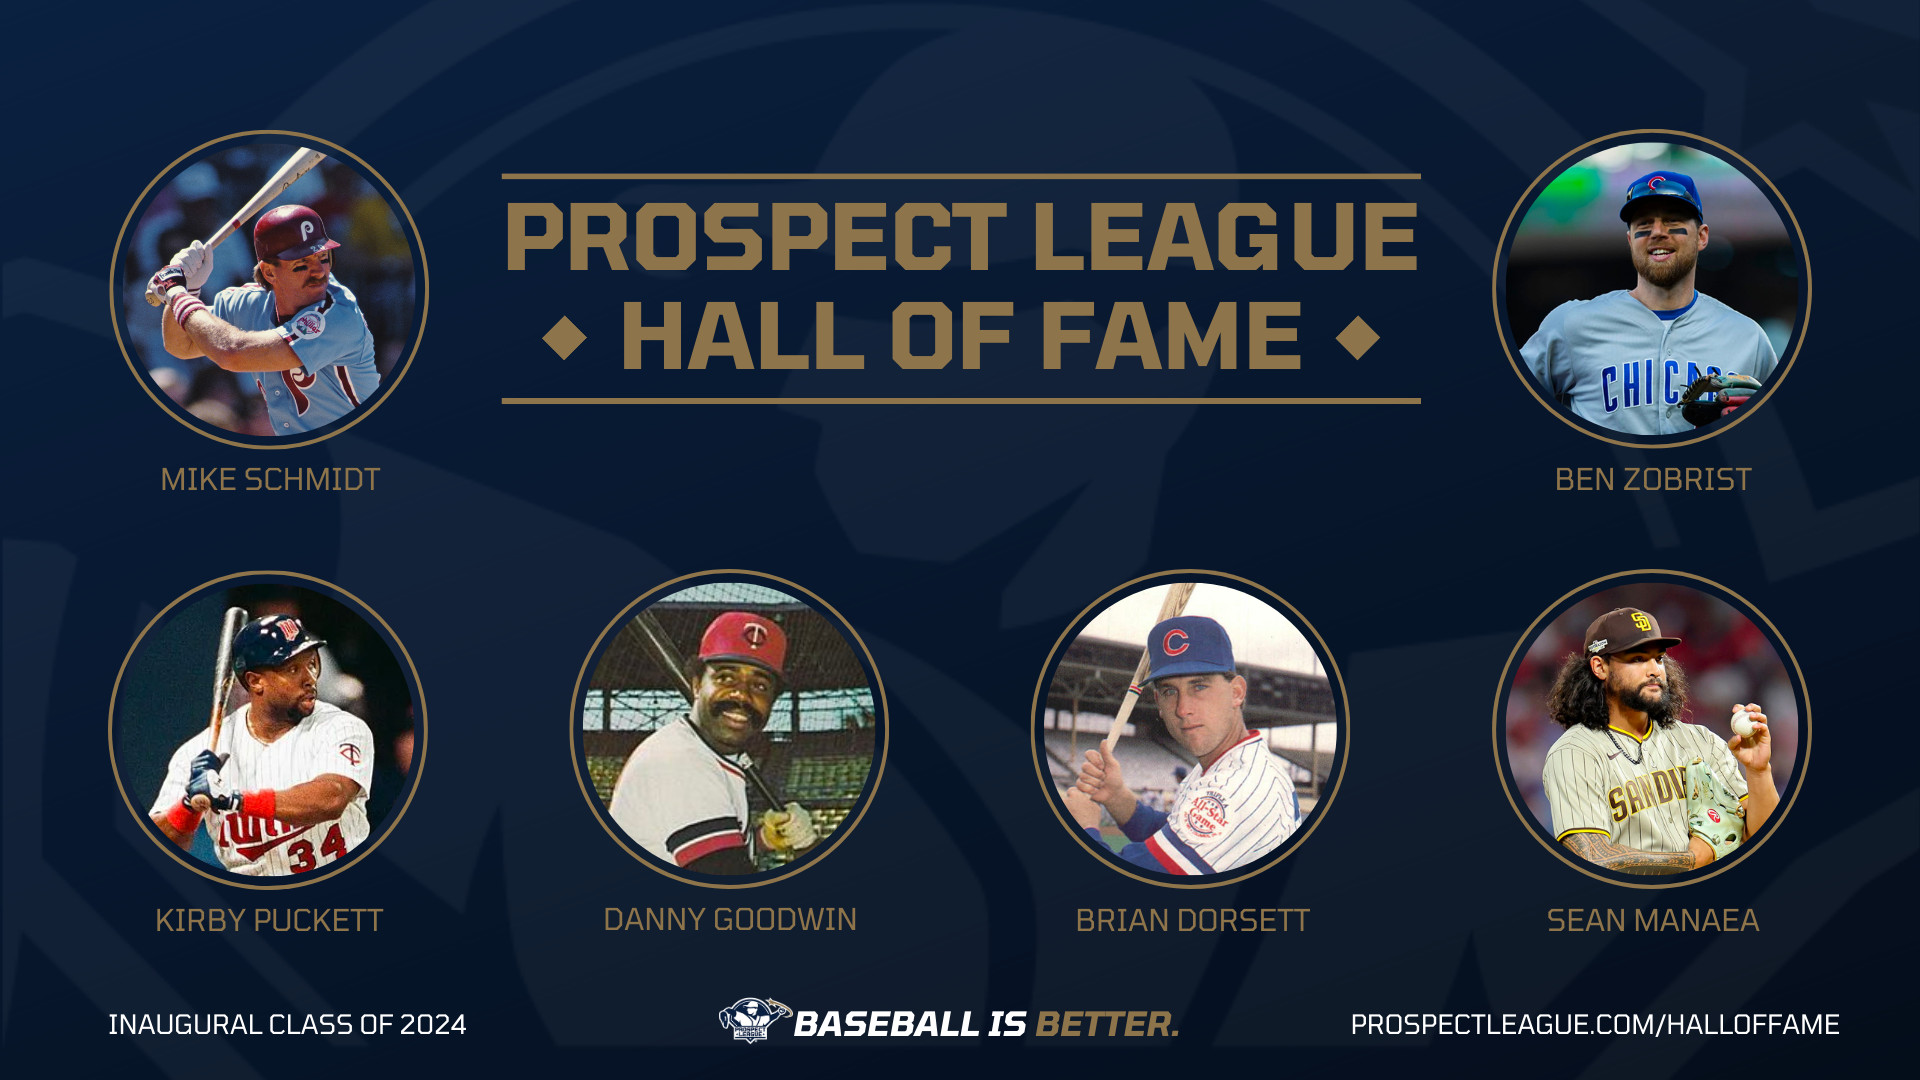 Prospect League Announces New-Look Hall of Fame with Six Inaugural Inductees